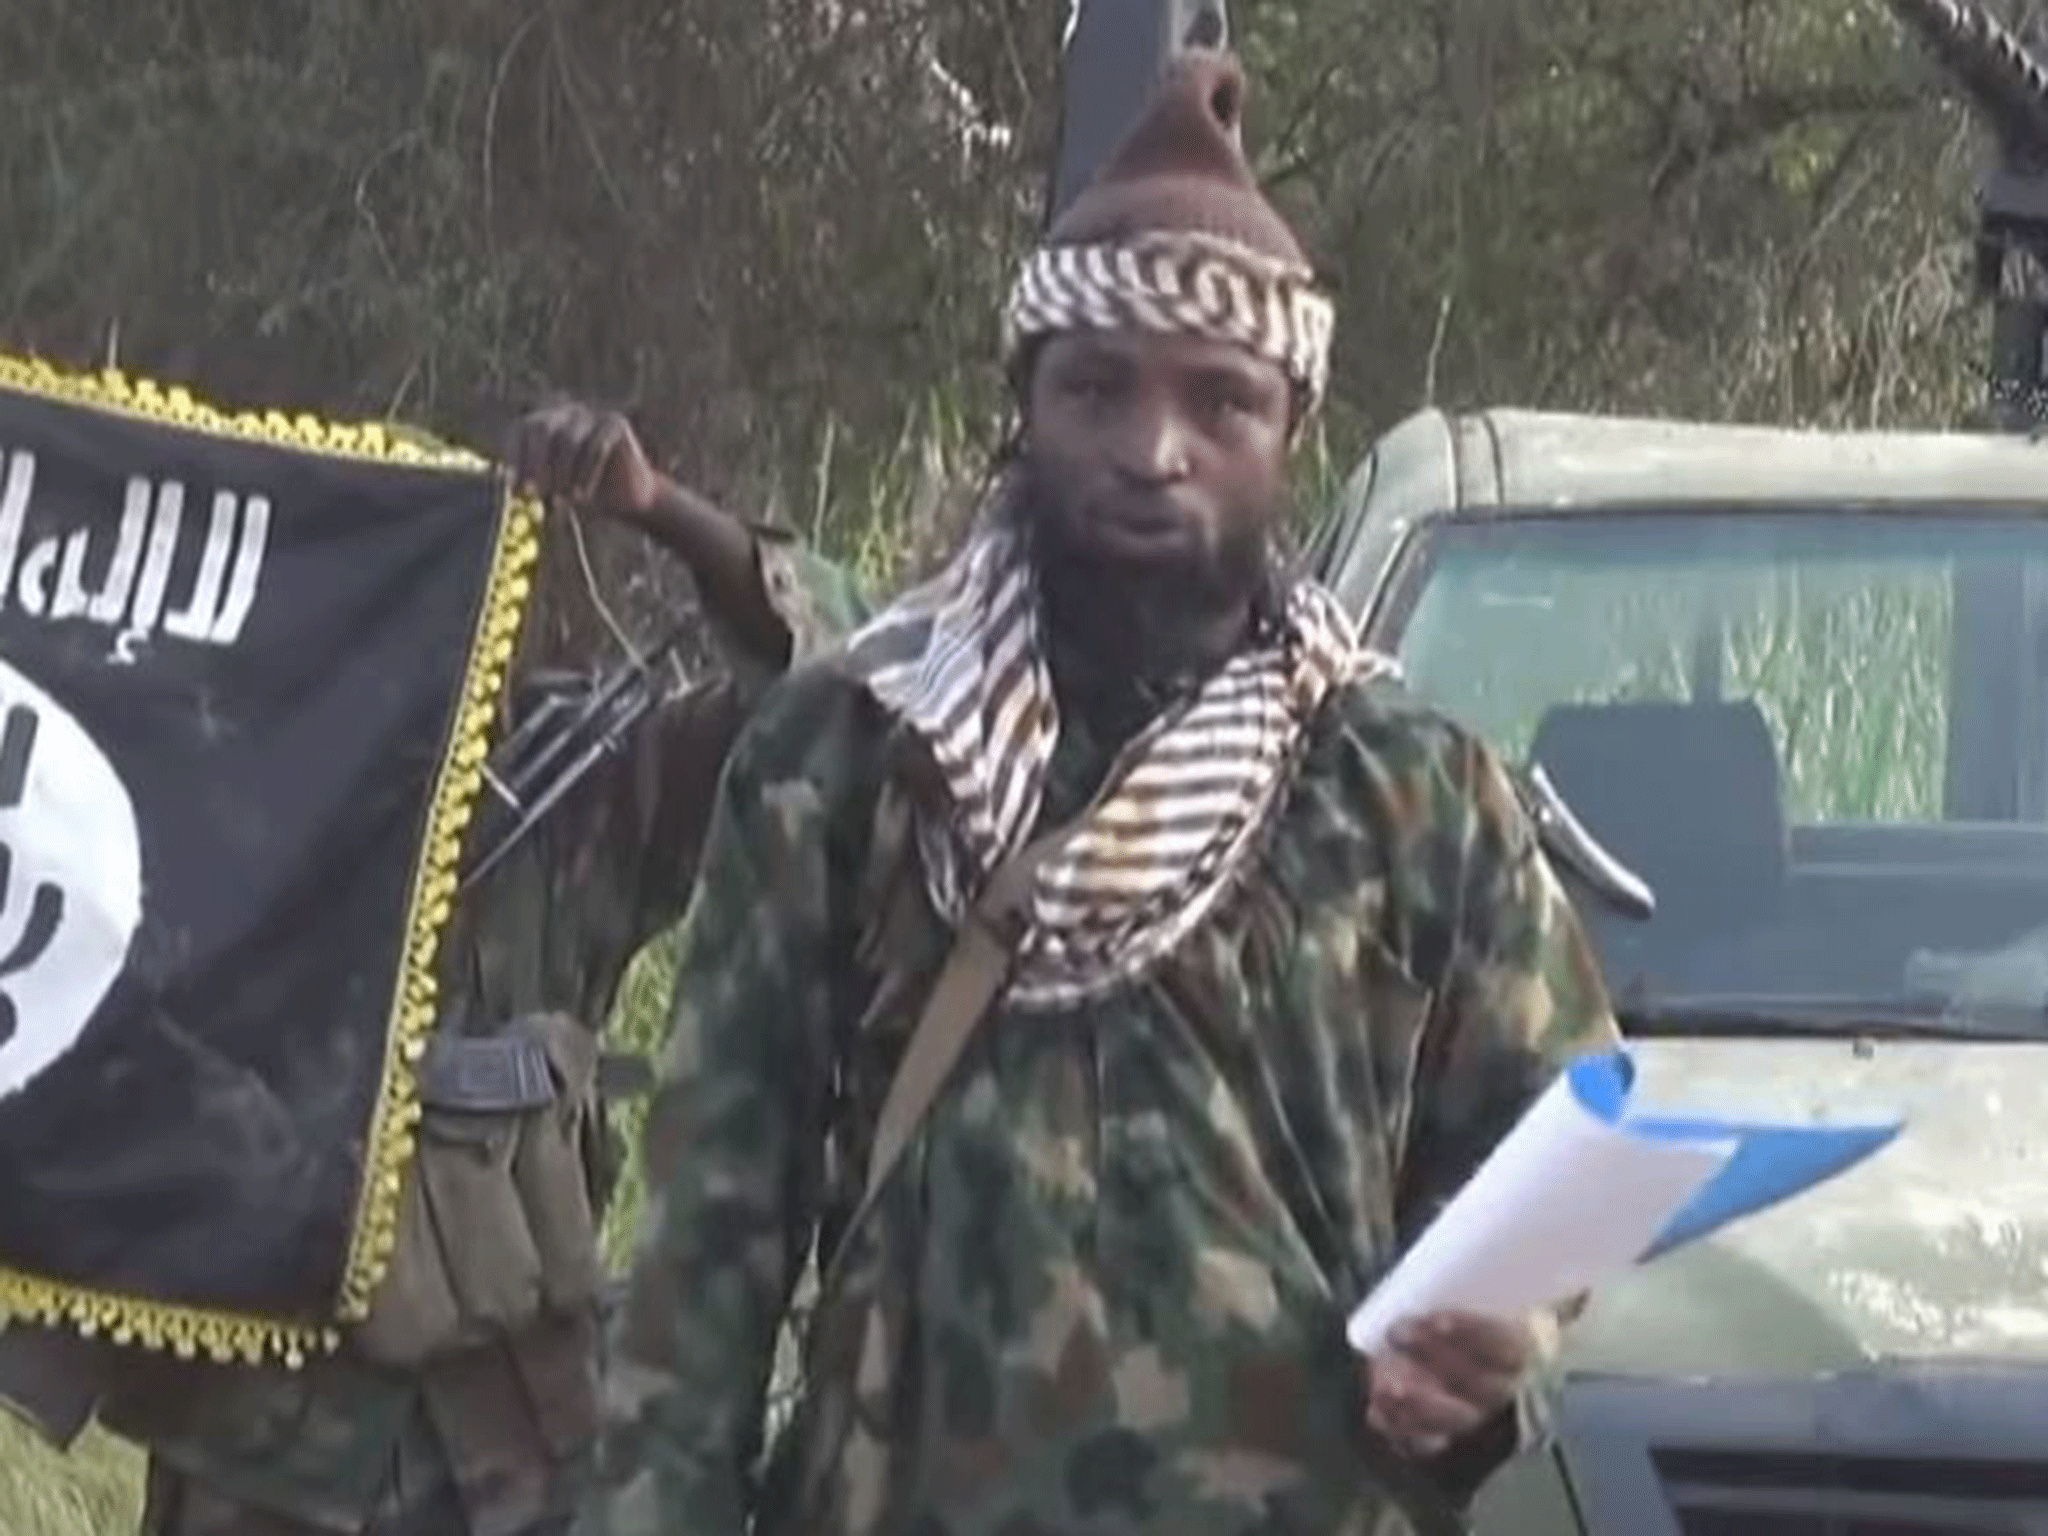 Abubakar Shekau, current leader of Boko Haram, declared the group's allegiance to Isis in March 2015